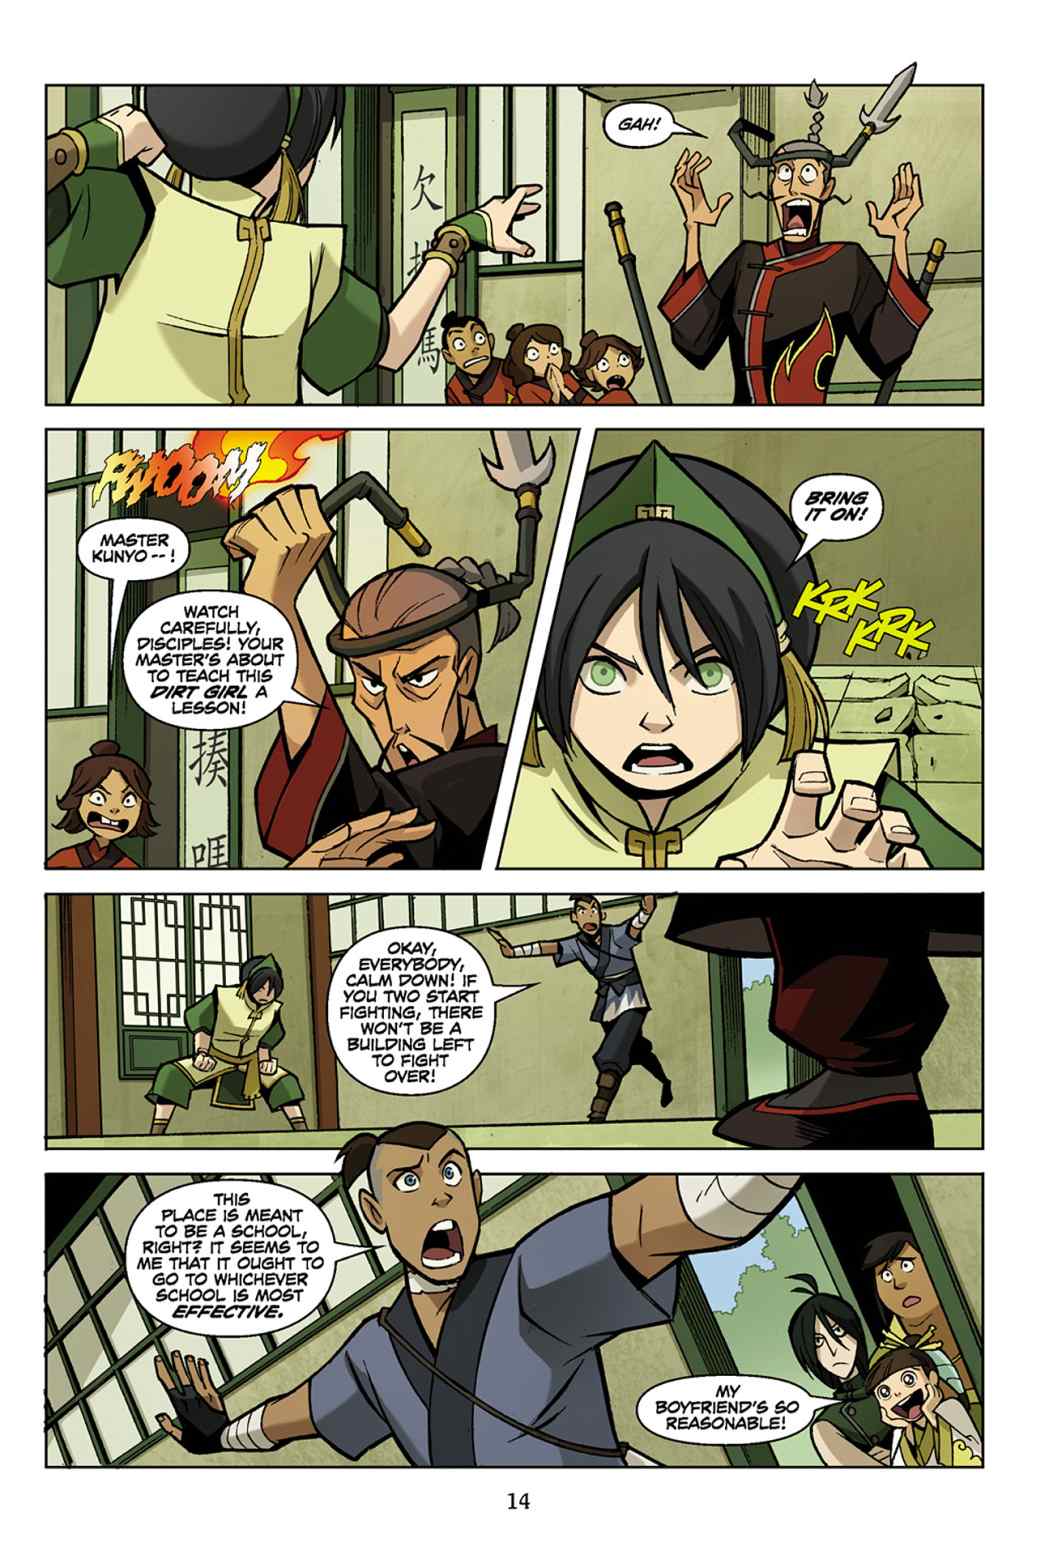 Read Comics Online Free - Avatar The Last Airbender Comic Book Issue #002 -  Page 15